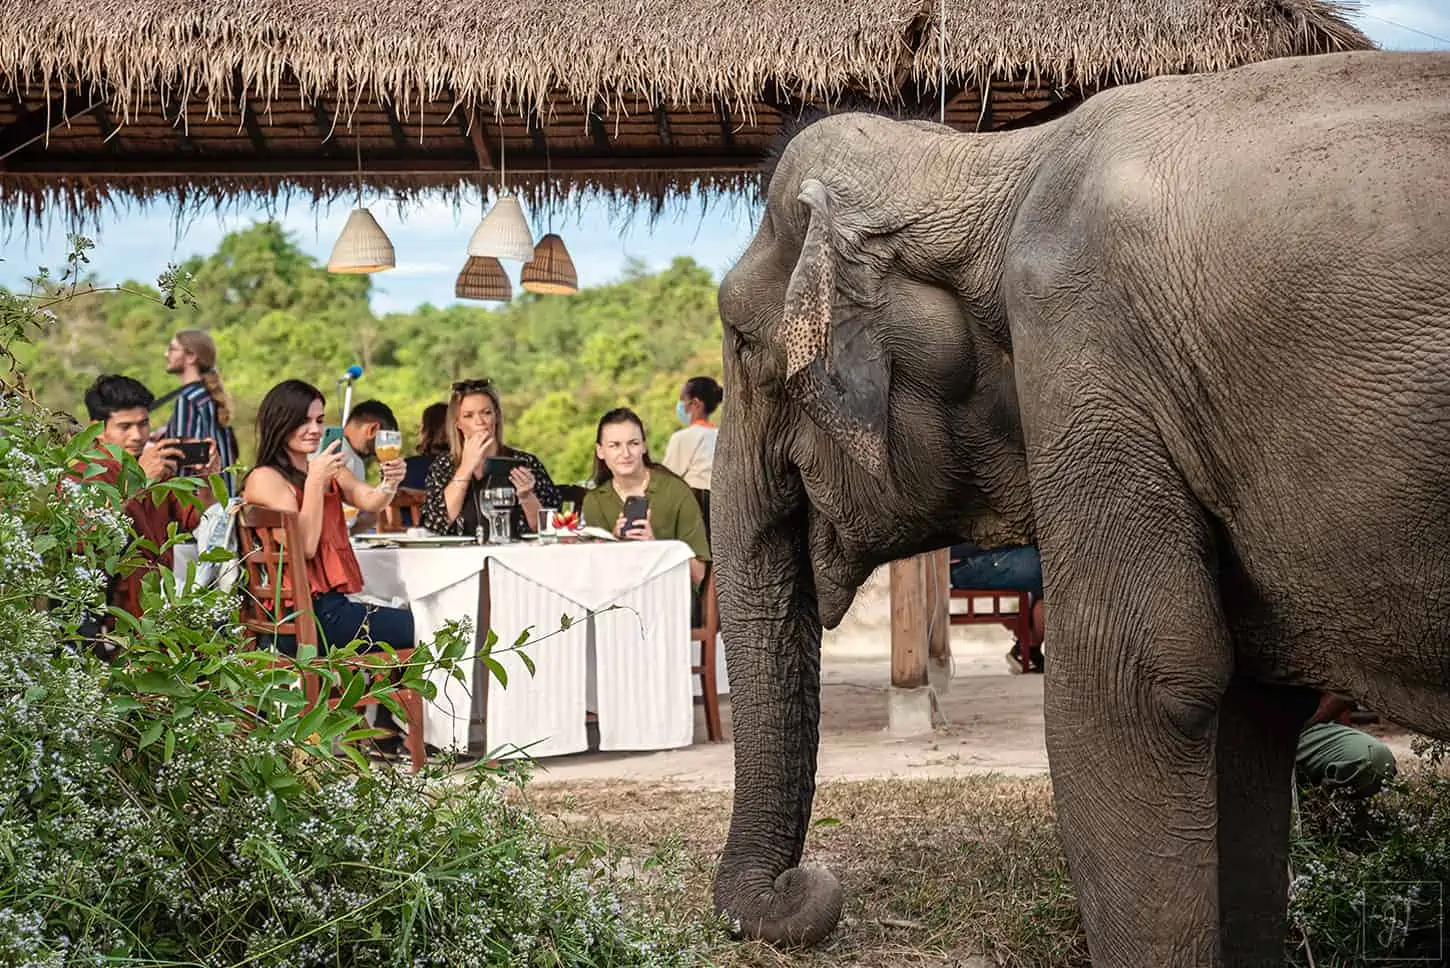 visitors, drinks and an elephant